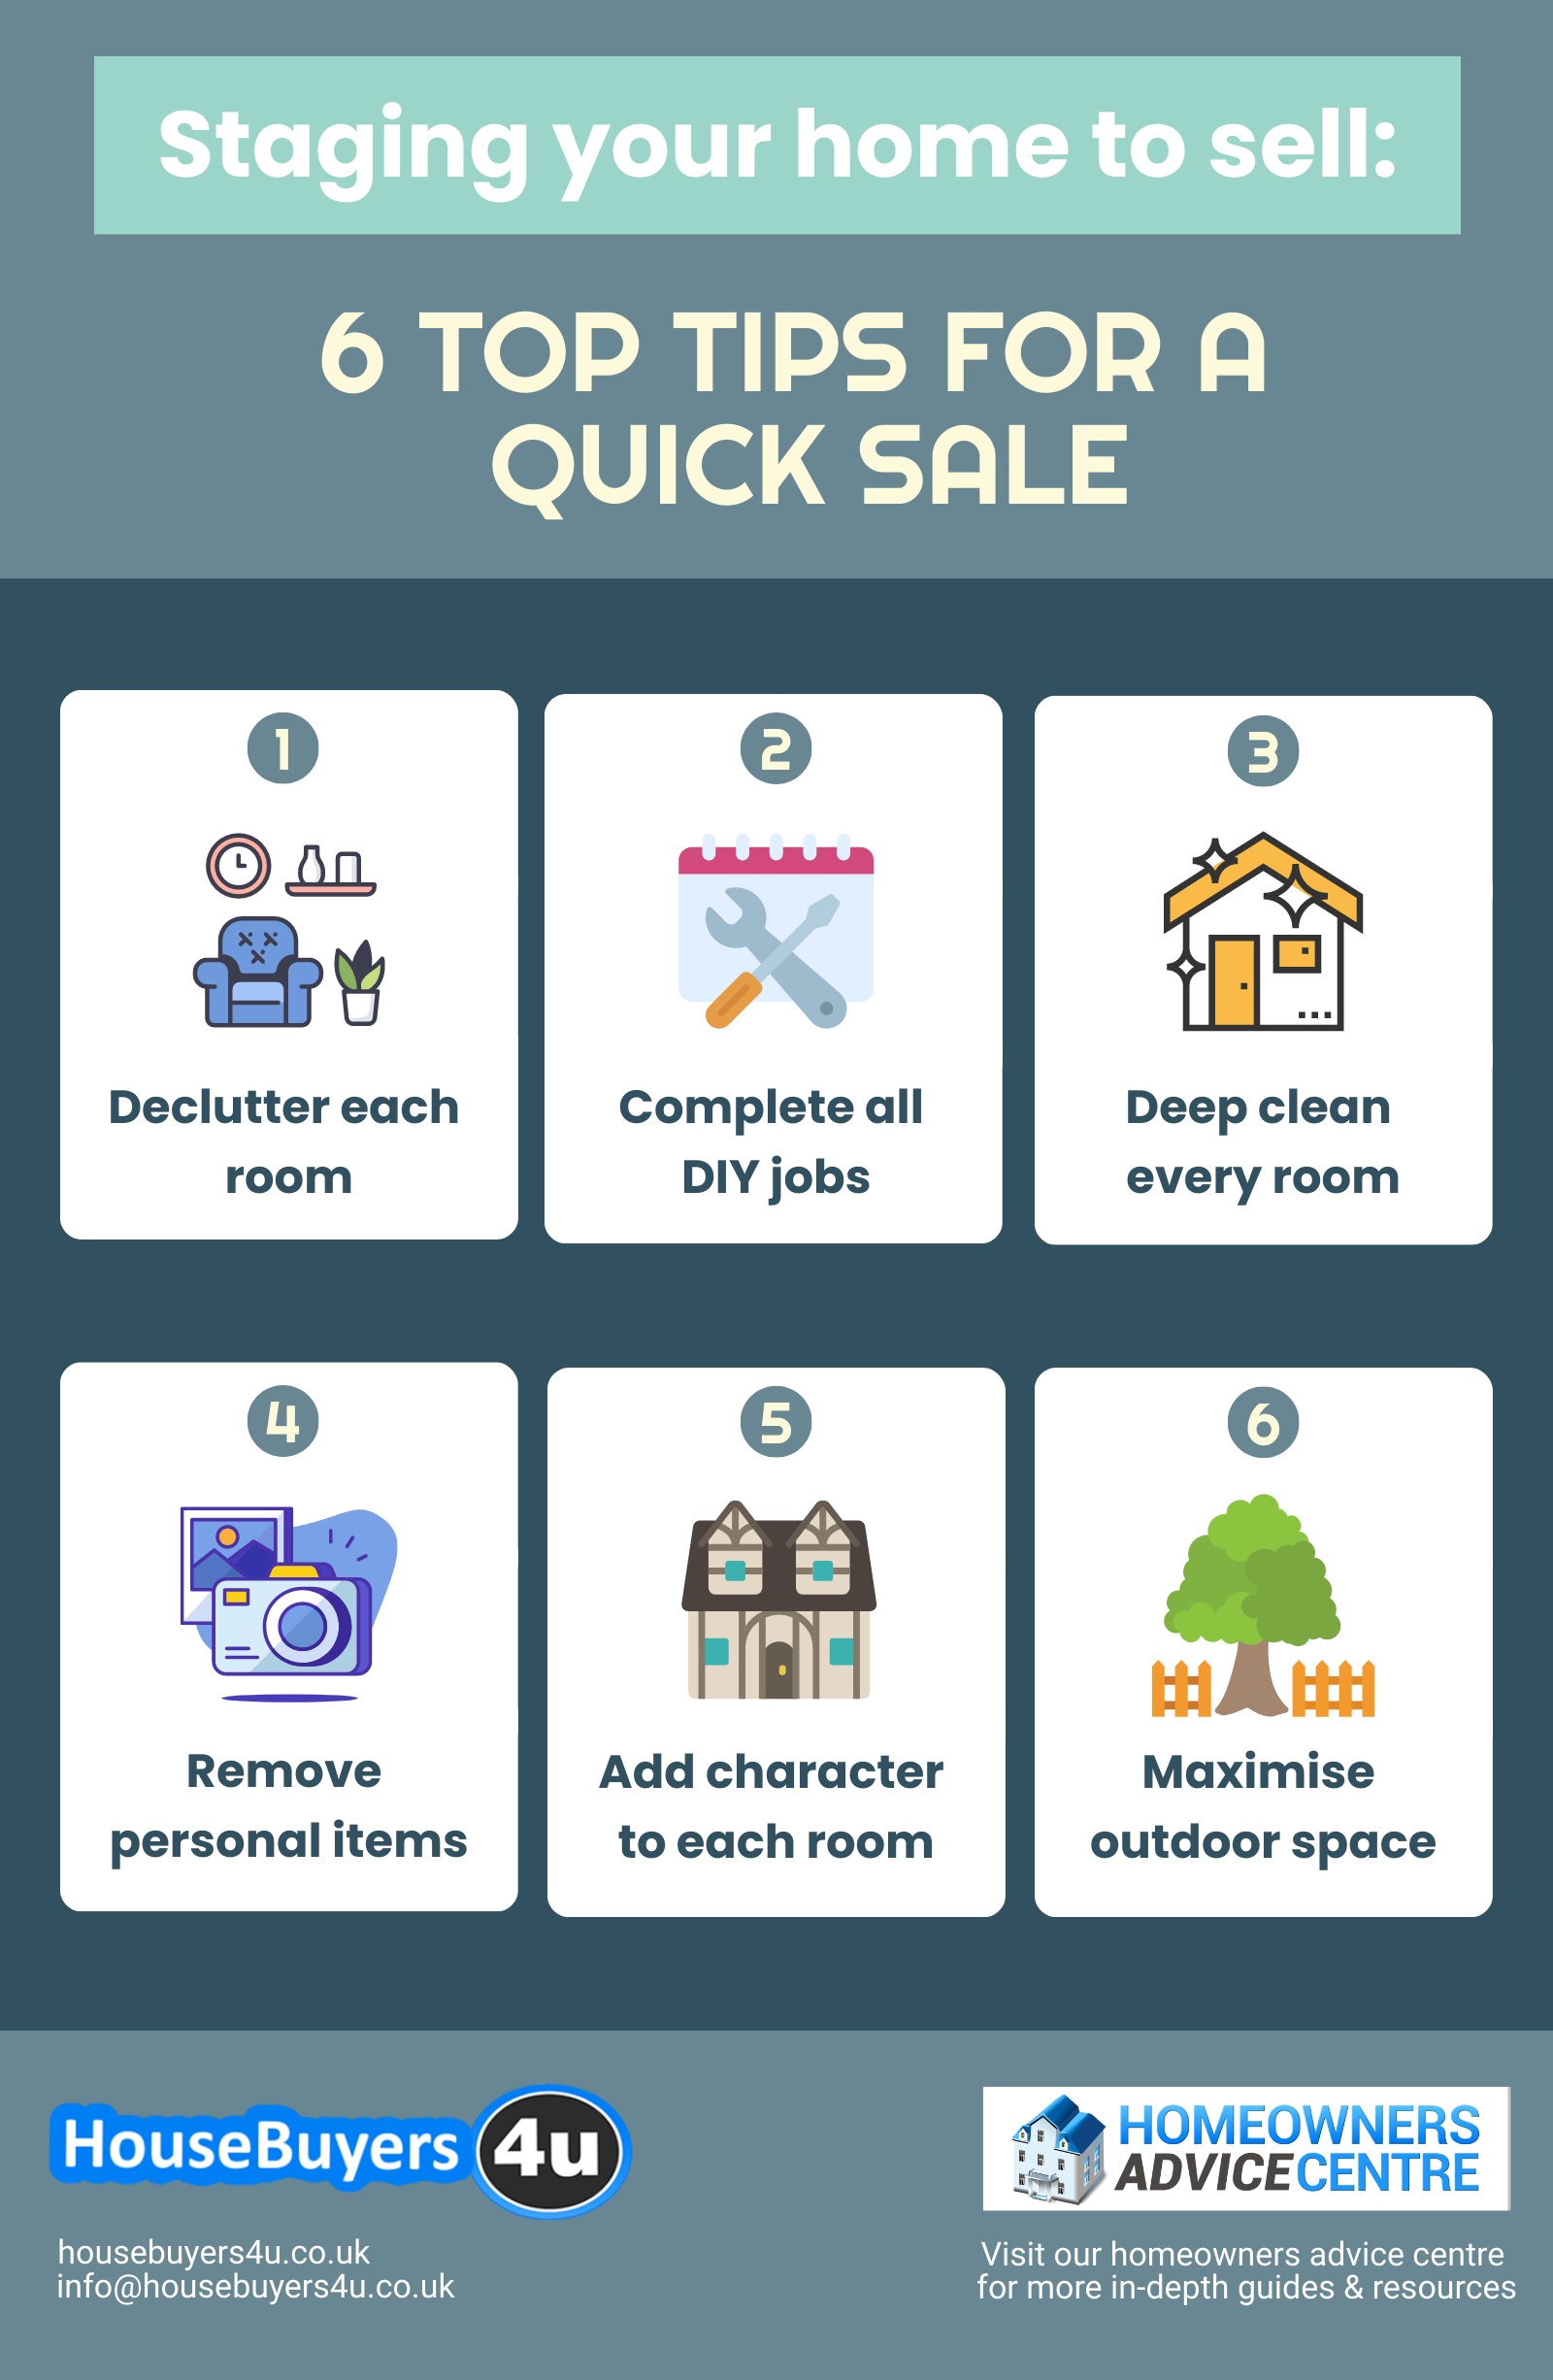 Staging your home to sell tips for a quick sale